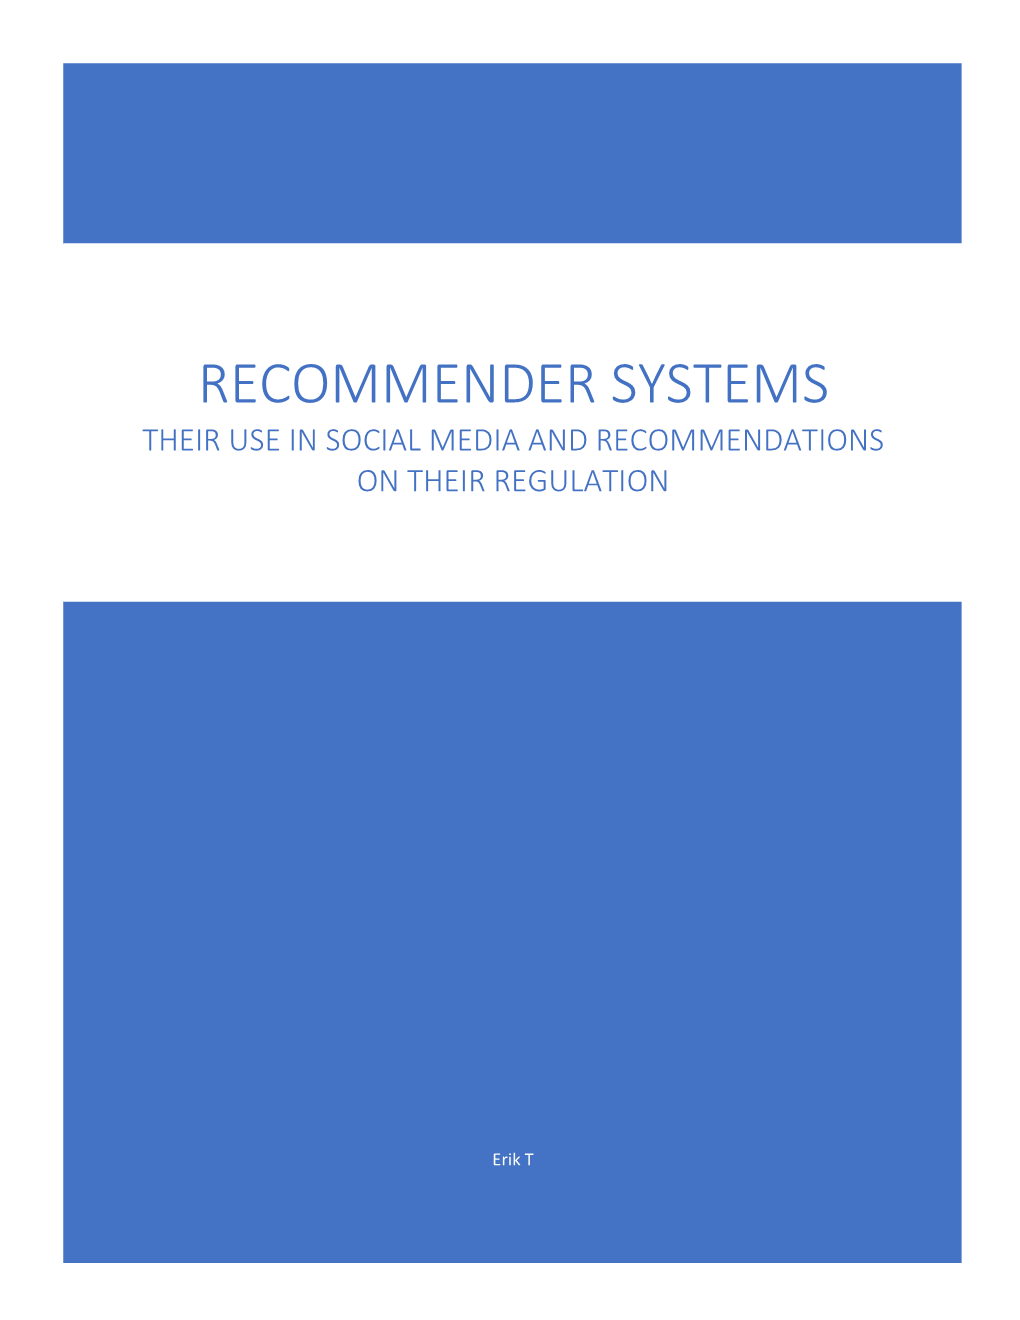 Recommender Systems Their Use in Social Media and Recommendations on Their Regulation